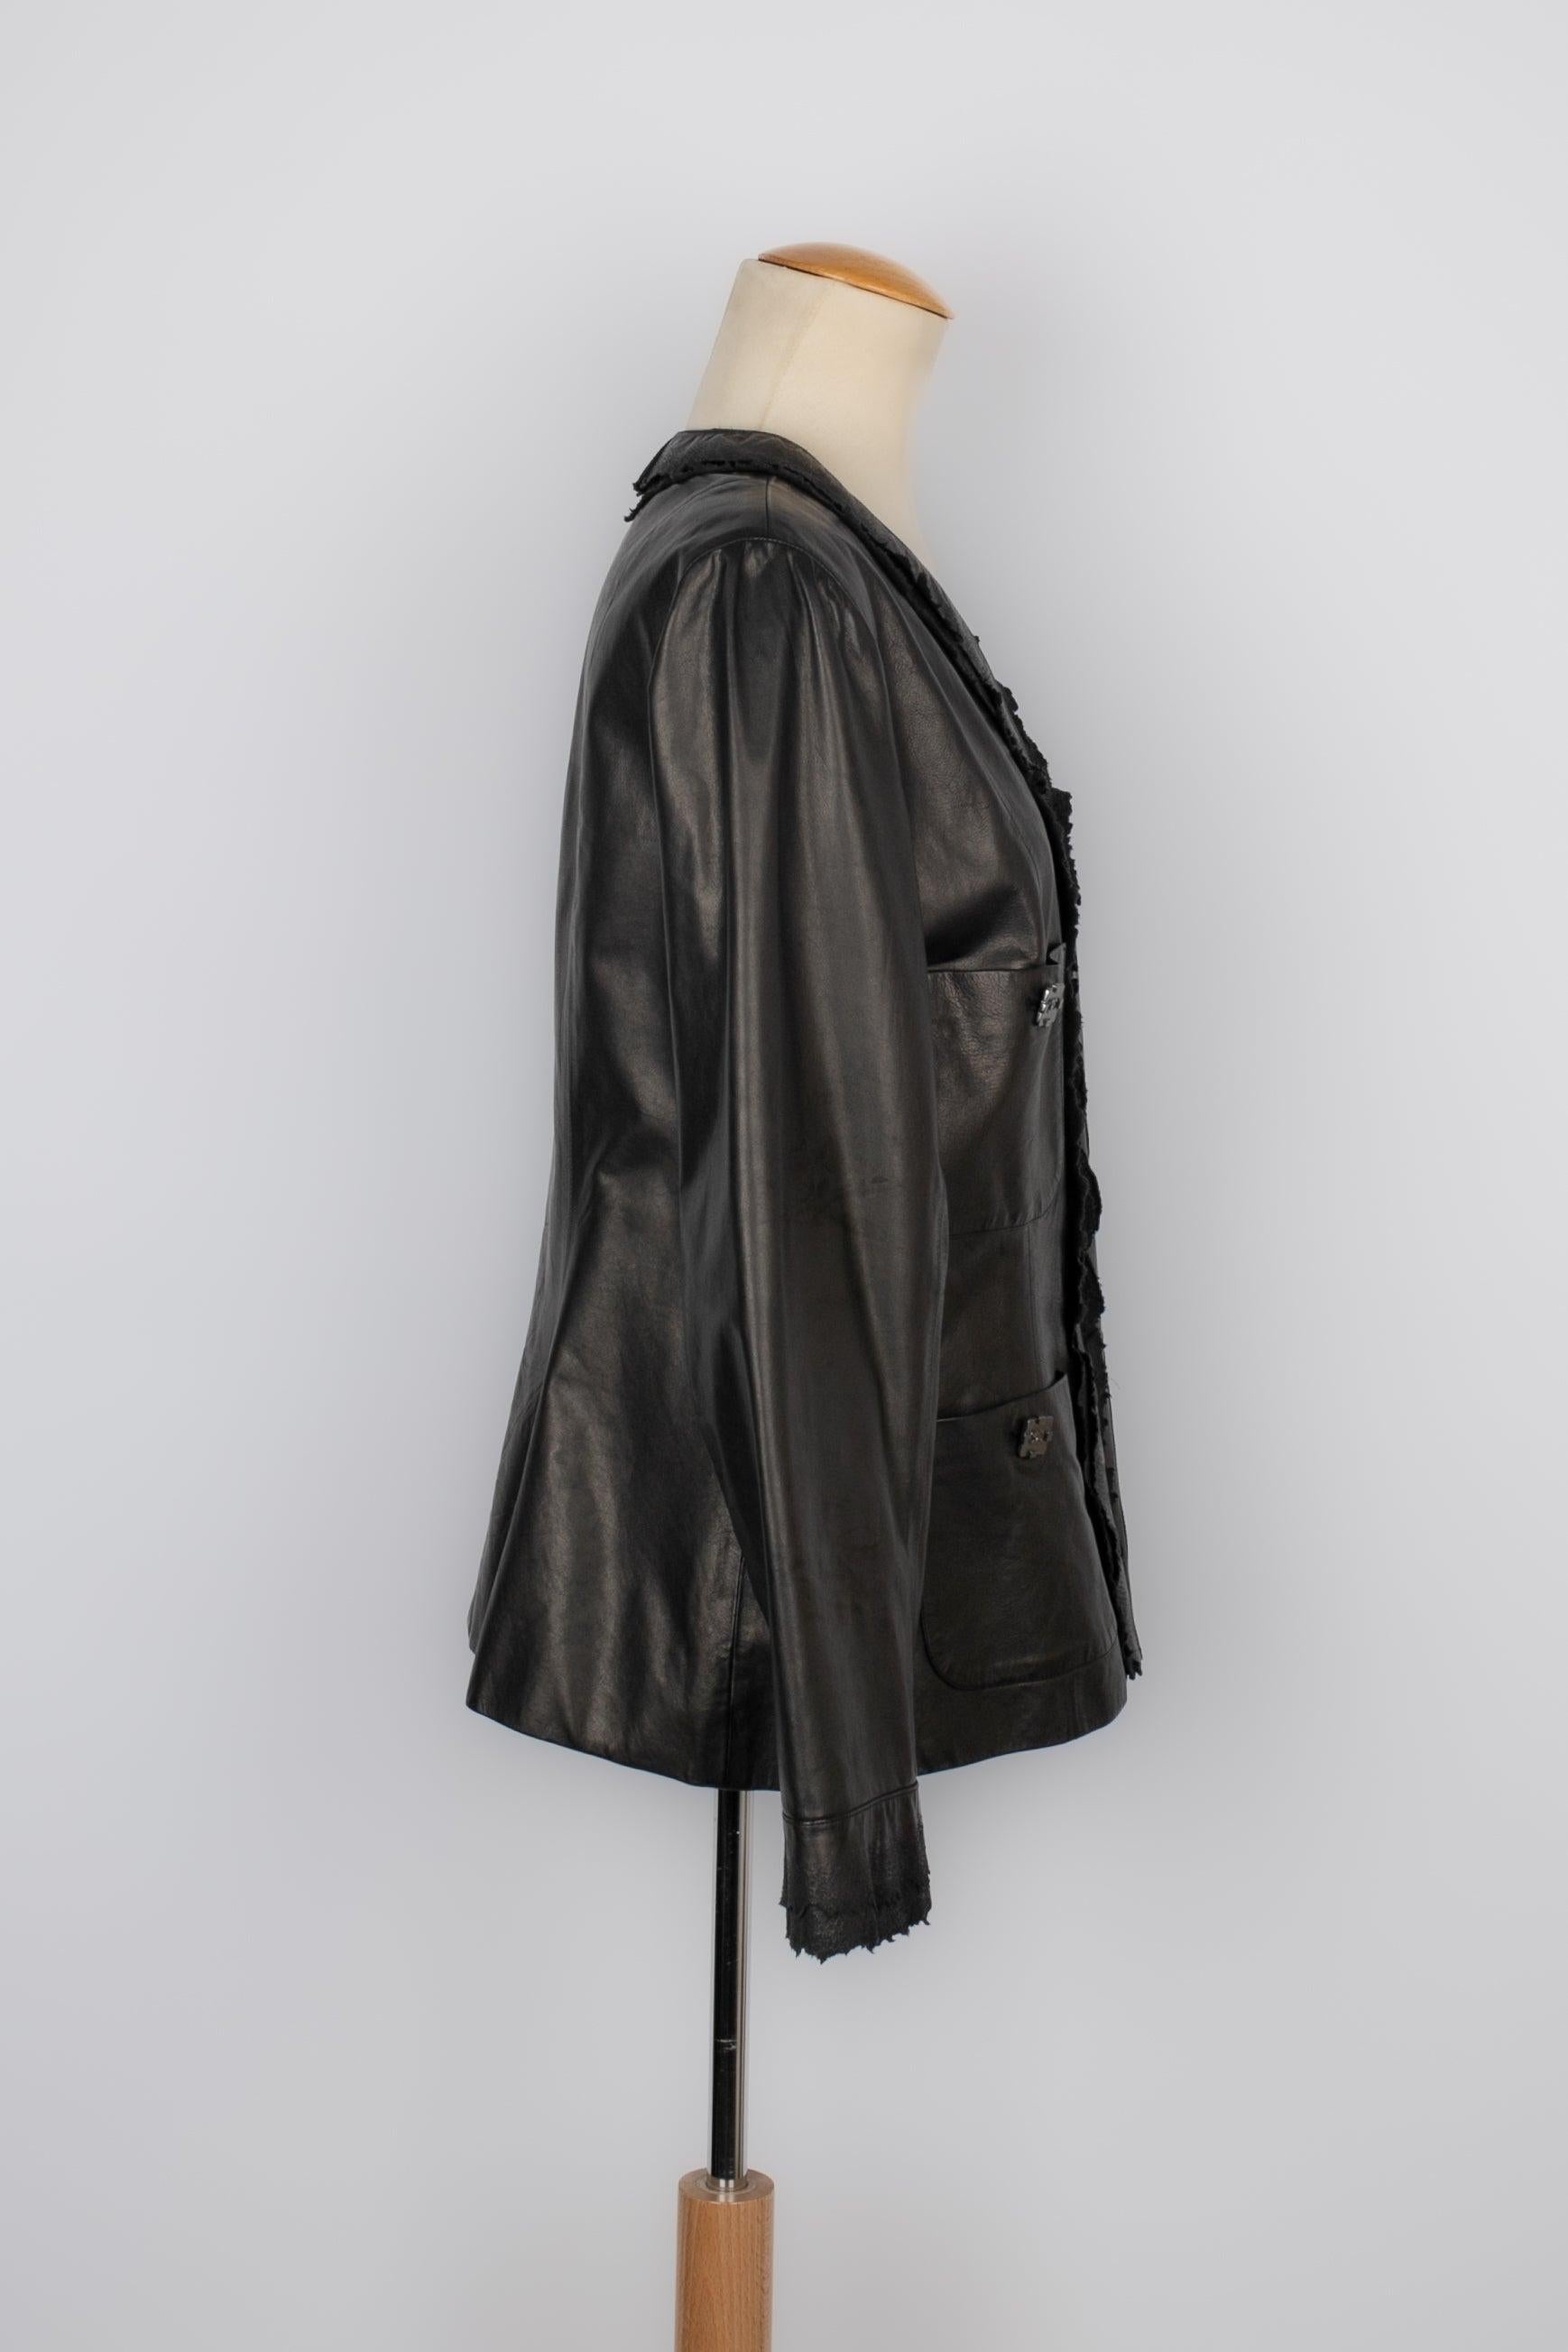 Chanel - (Made in France) Jacket in black calfskin and silk lining. Size 46FR.

Additional information:
Condition: Very good condition
Dimensions: Shoulder width: 42 cm - Sleeve length: 60 cm - Length: 60 cm

Seller Reference: FV211